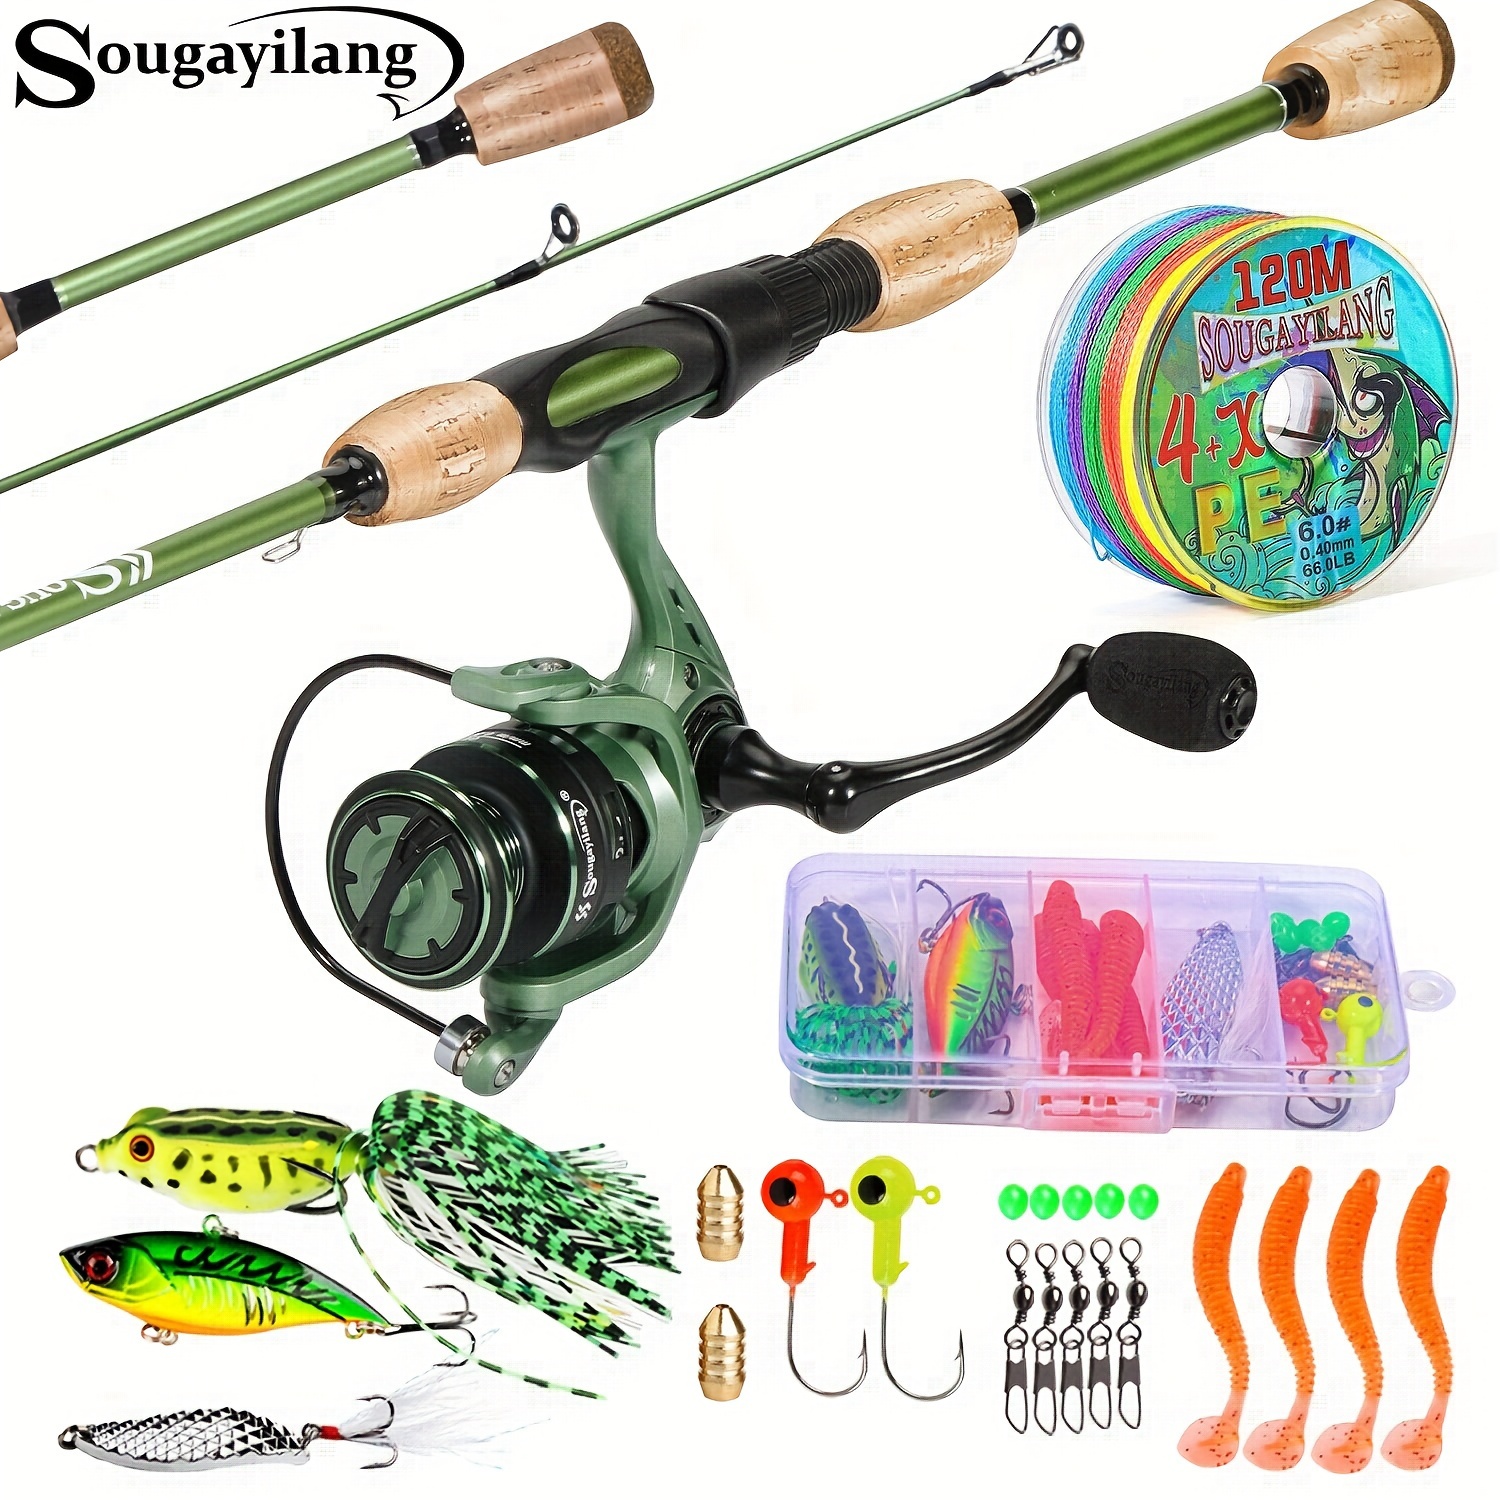 Sougayilang Spinning Reel And Fishing Rod Combination Set, Including  2-section Durable Carbon Fishing Rod, 5.2:1 Gear Ratio Fishing Reel With  EVA Hand